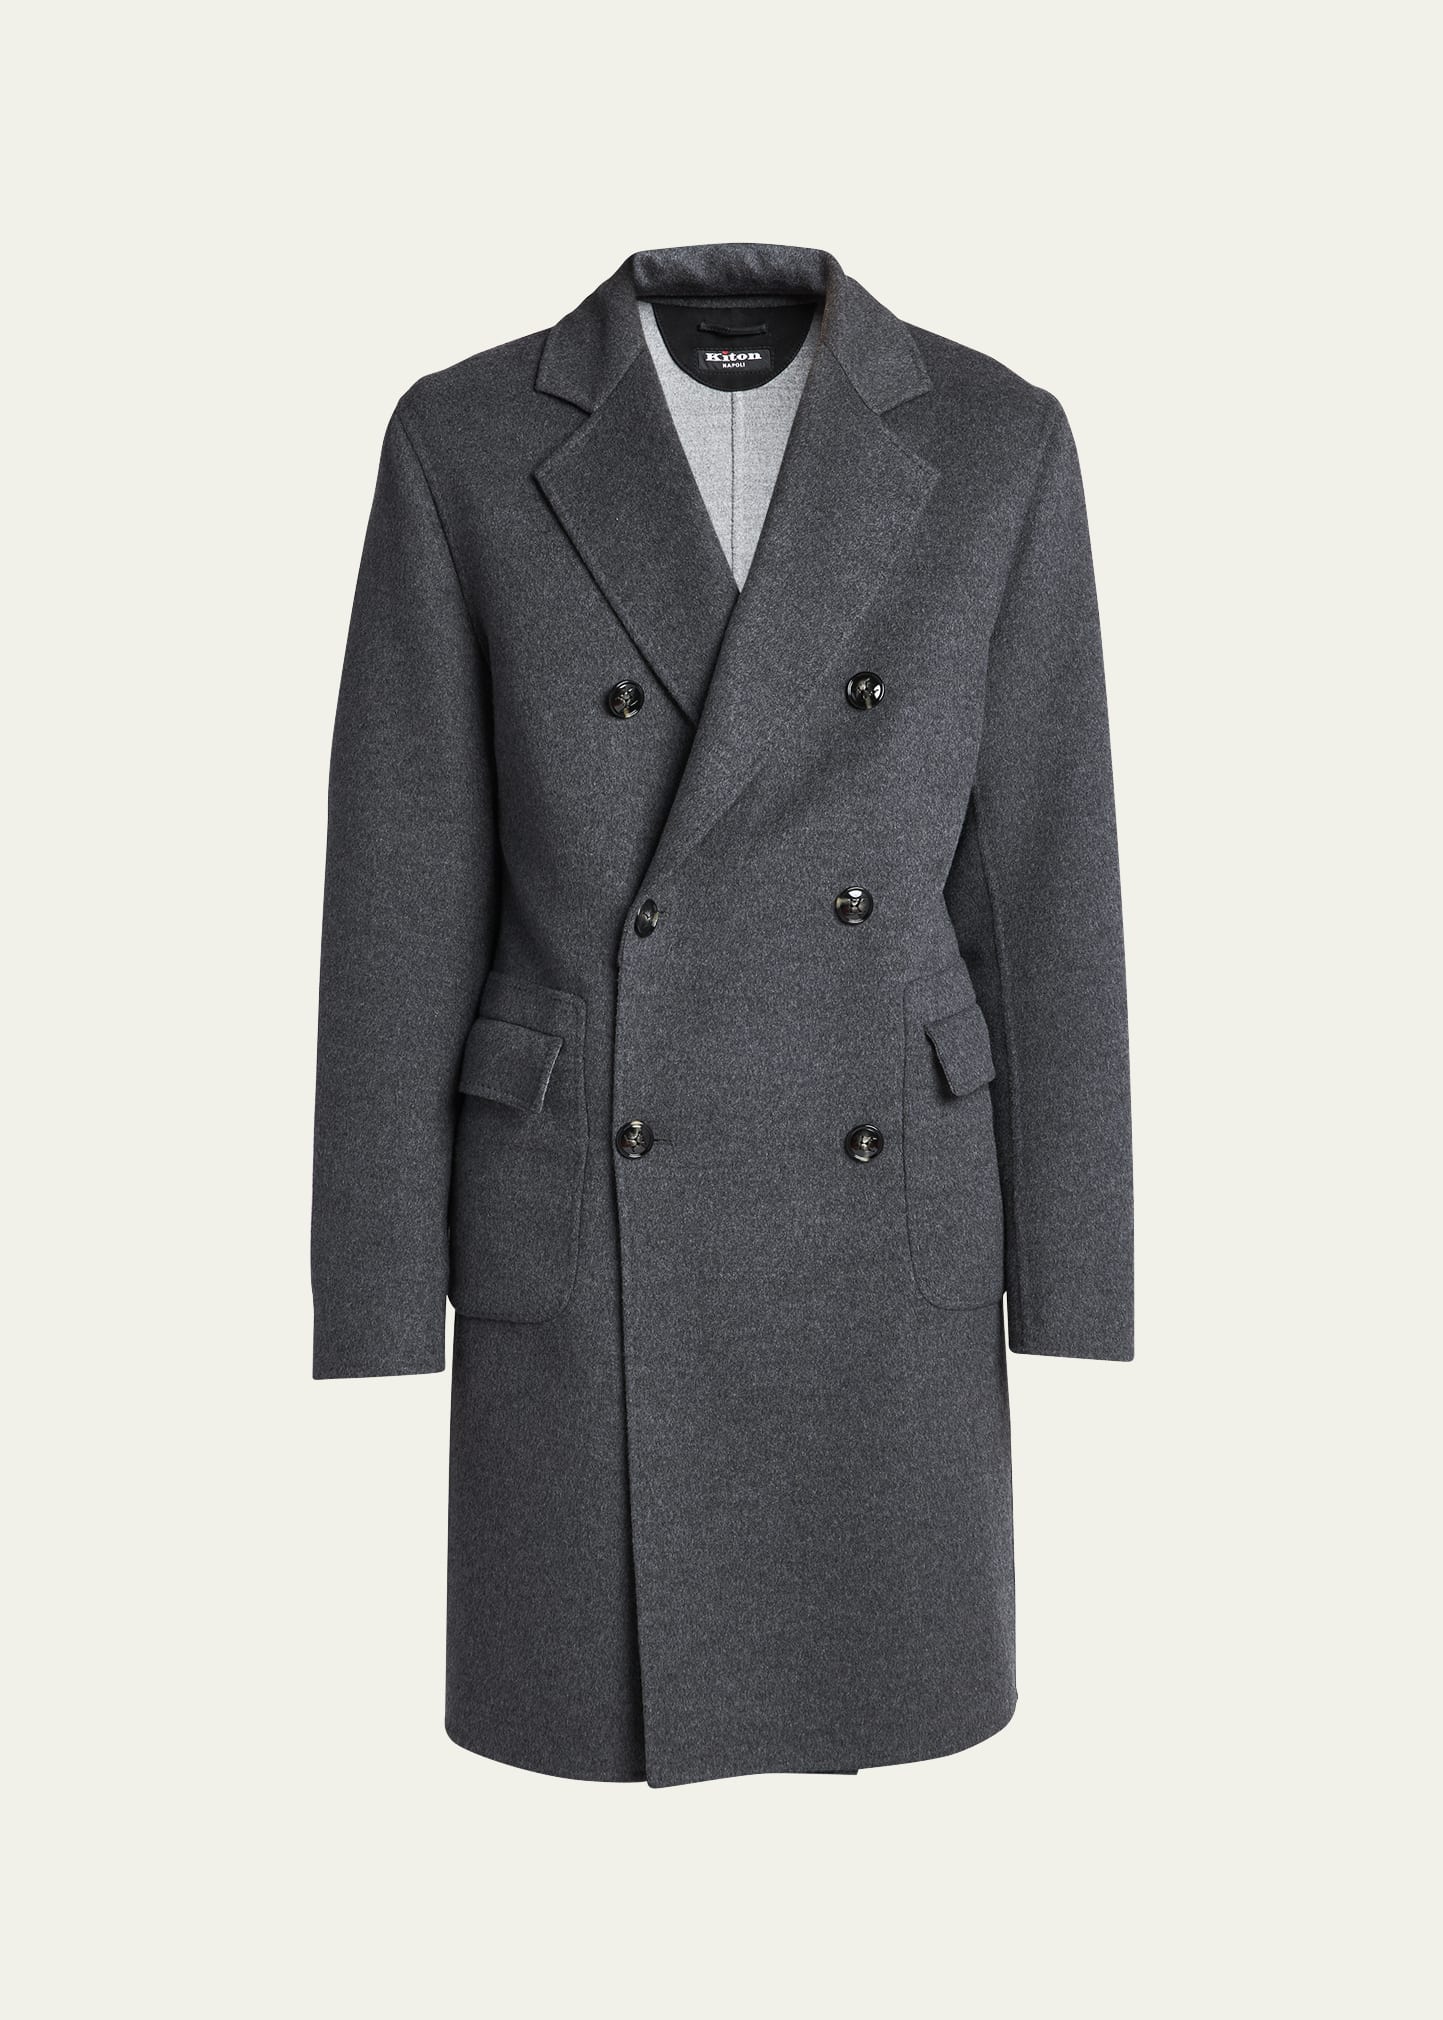 Kiton Men's Cashmere-wool Double-breasted Overcoat In Gry